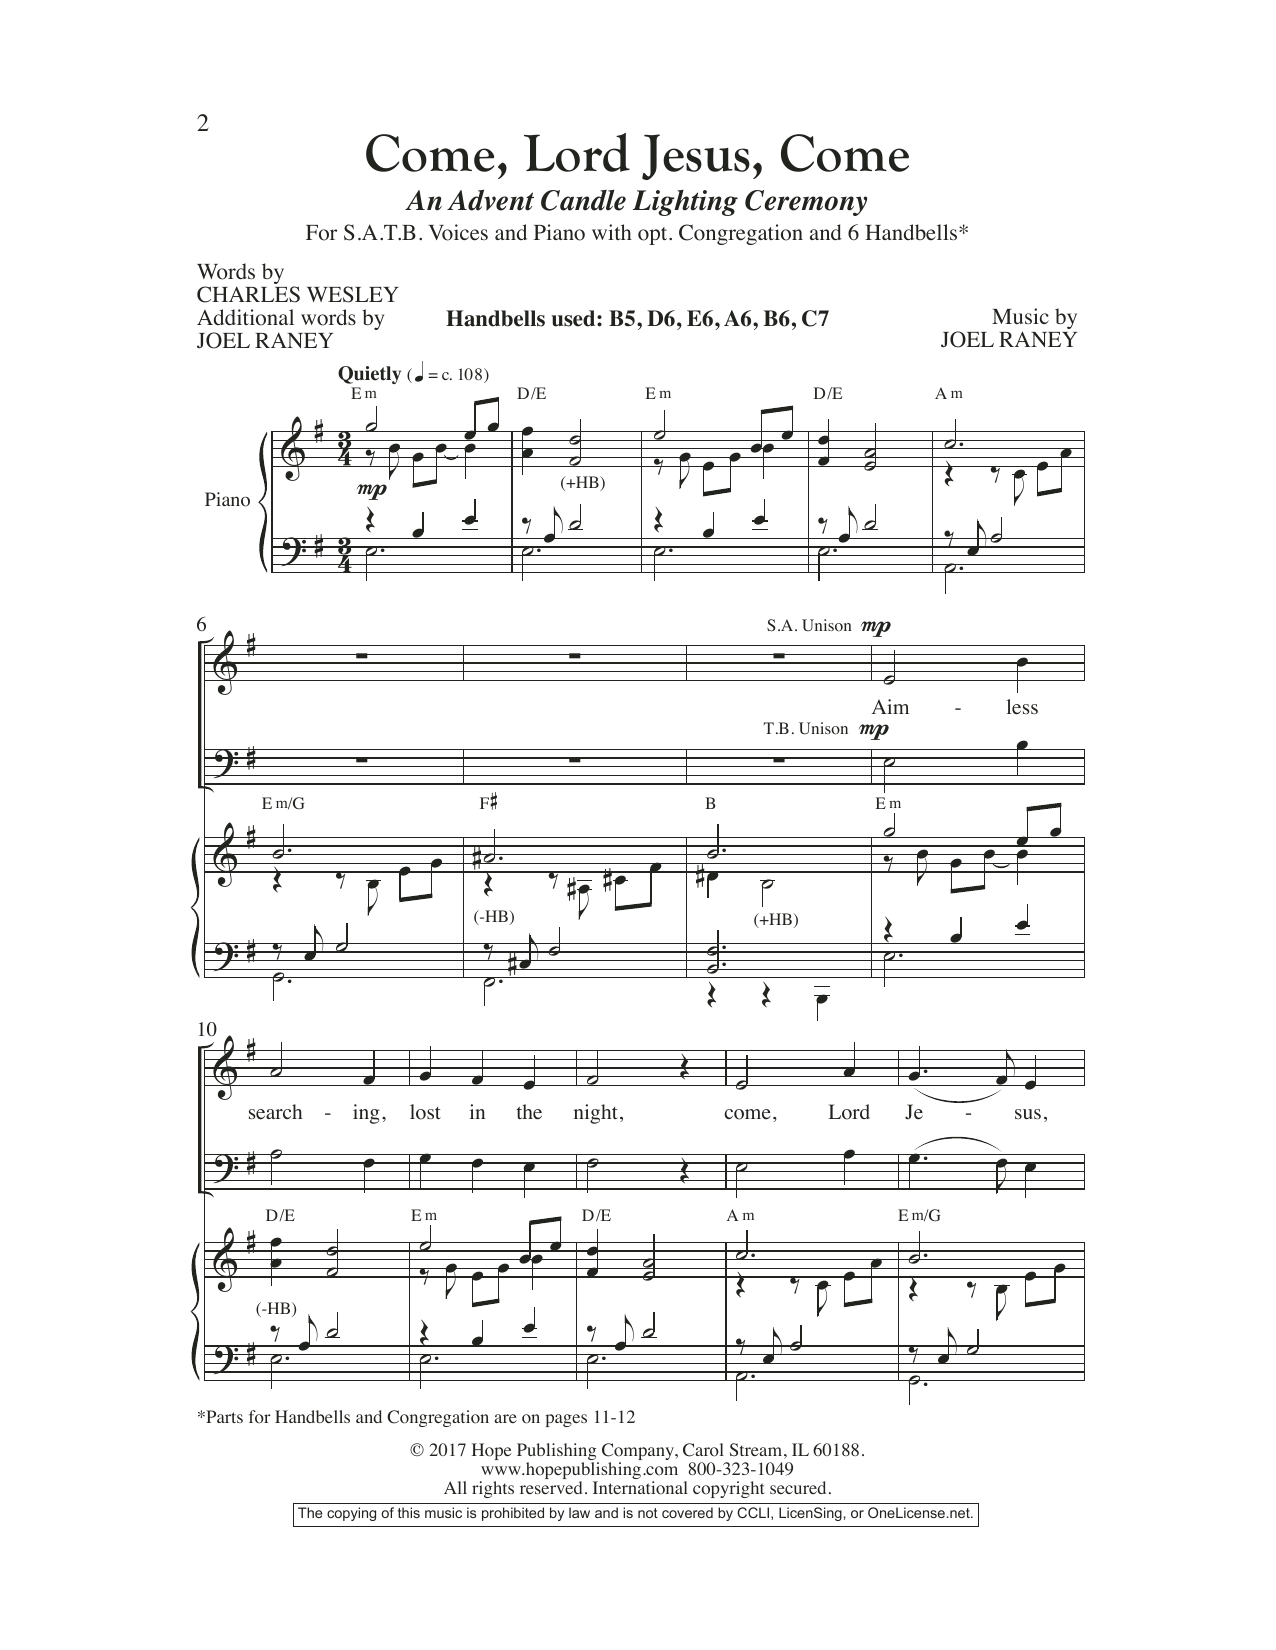 Download Joel Raney Come, Lord Jesus, Come Sheet Music